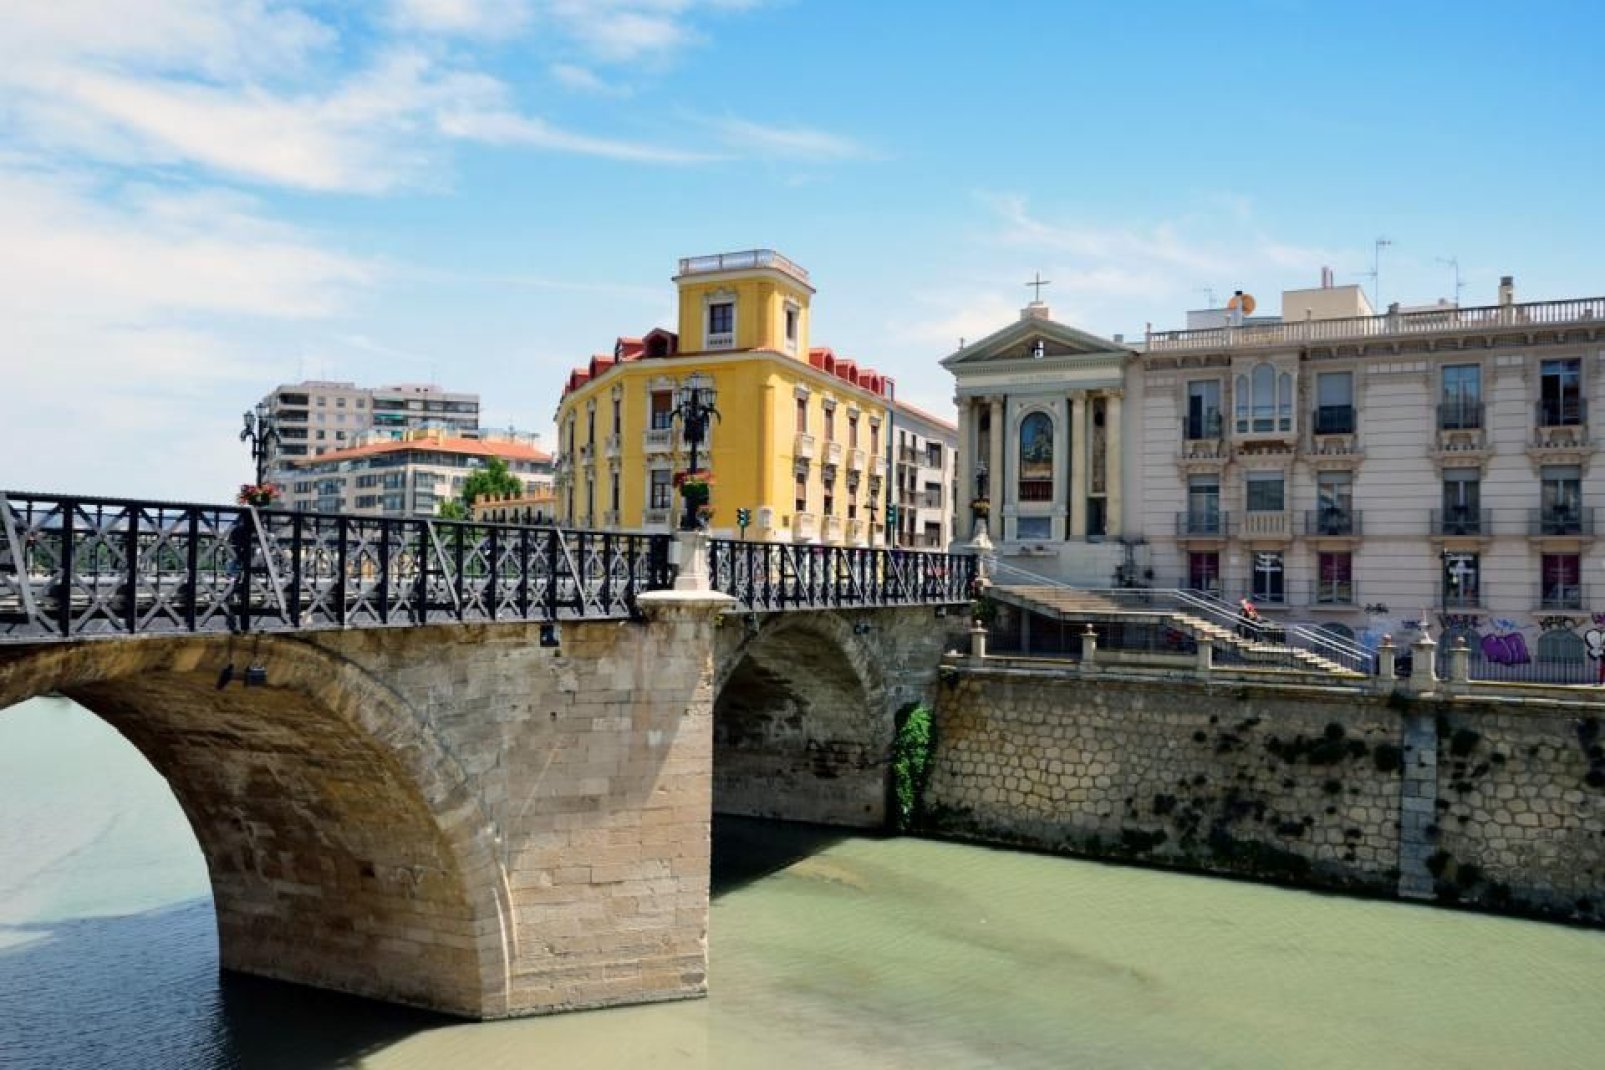 The river crosses the city from west to east, several bridges of different styles span it.